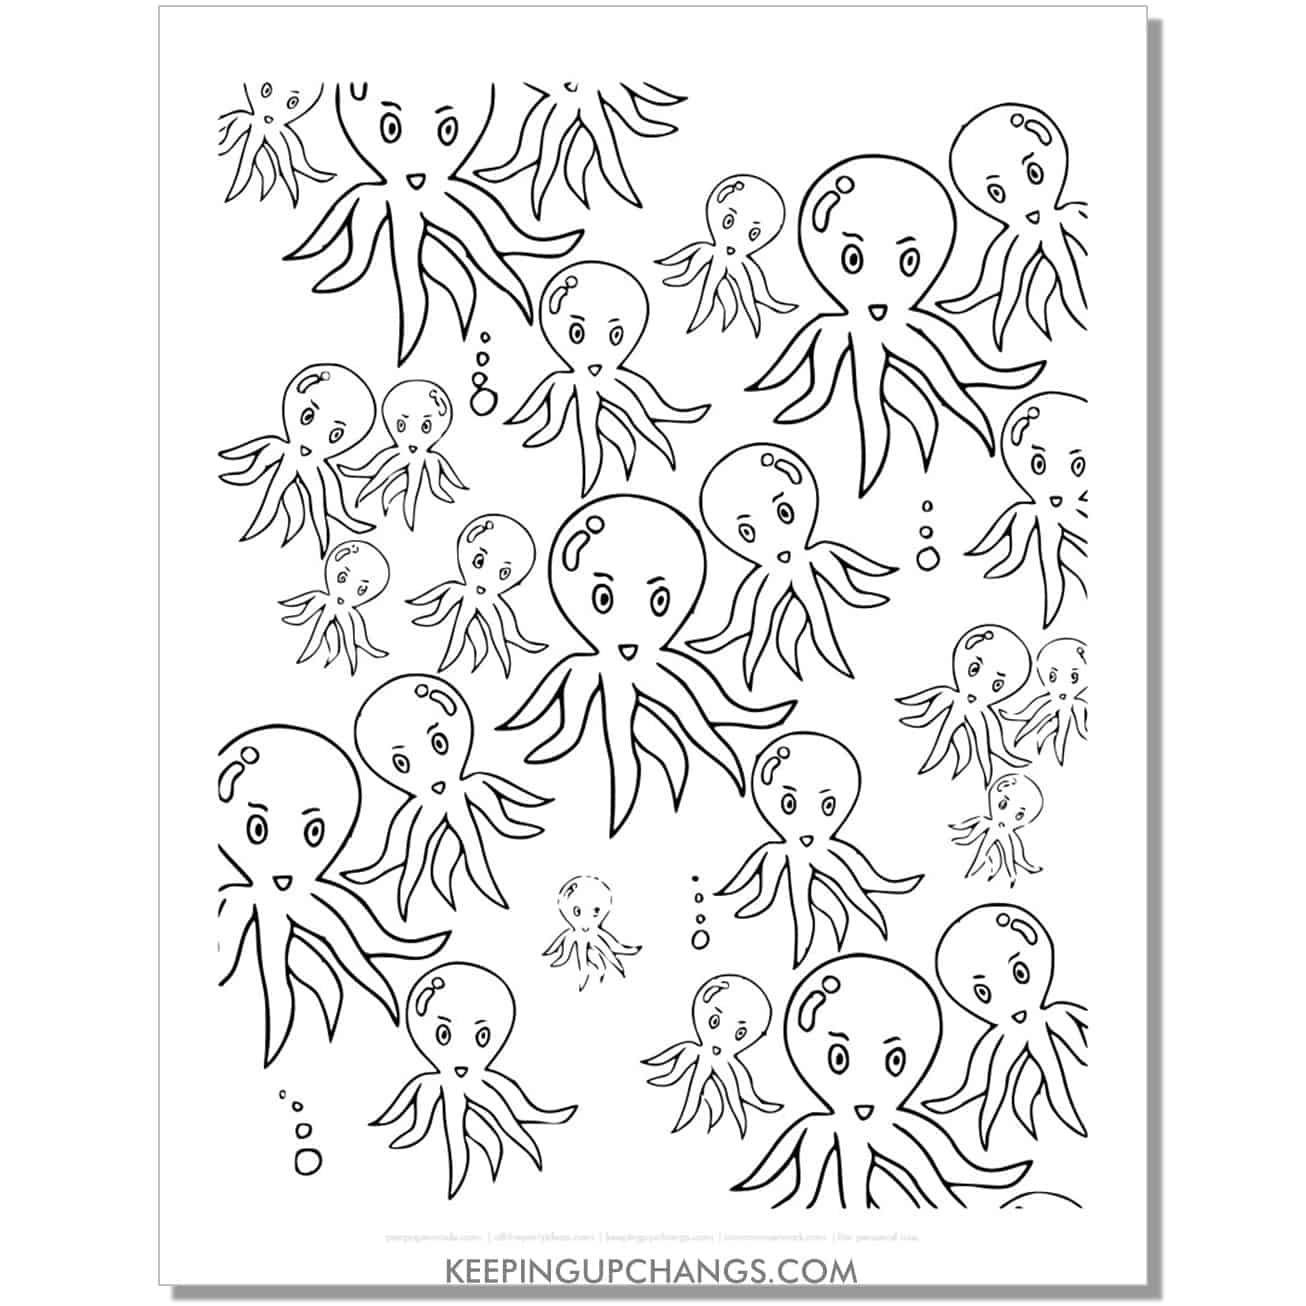 free cartoon octopus collage coloring page, sheet.